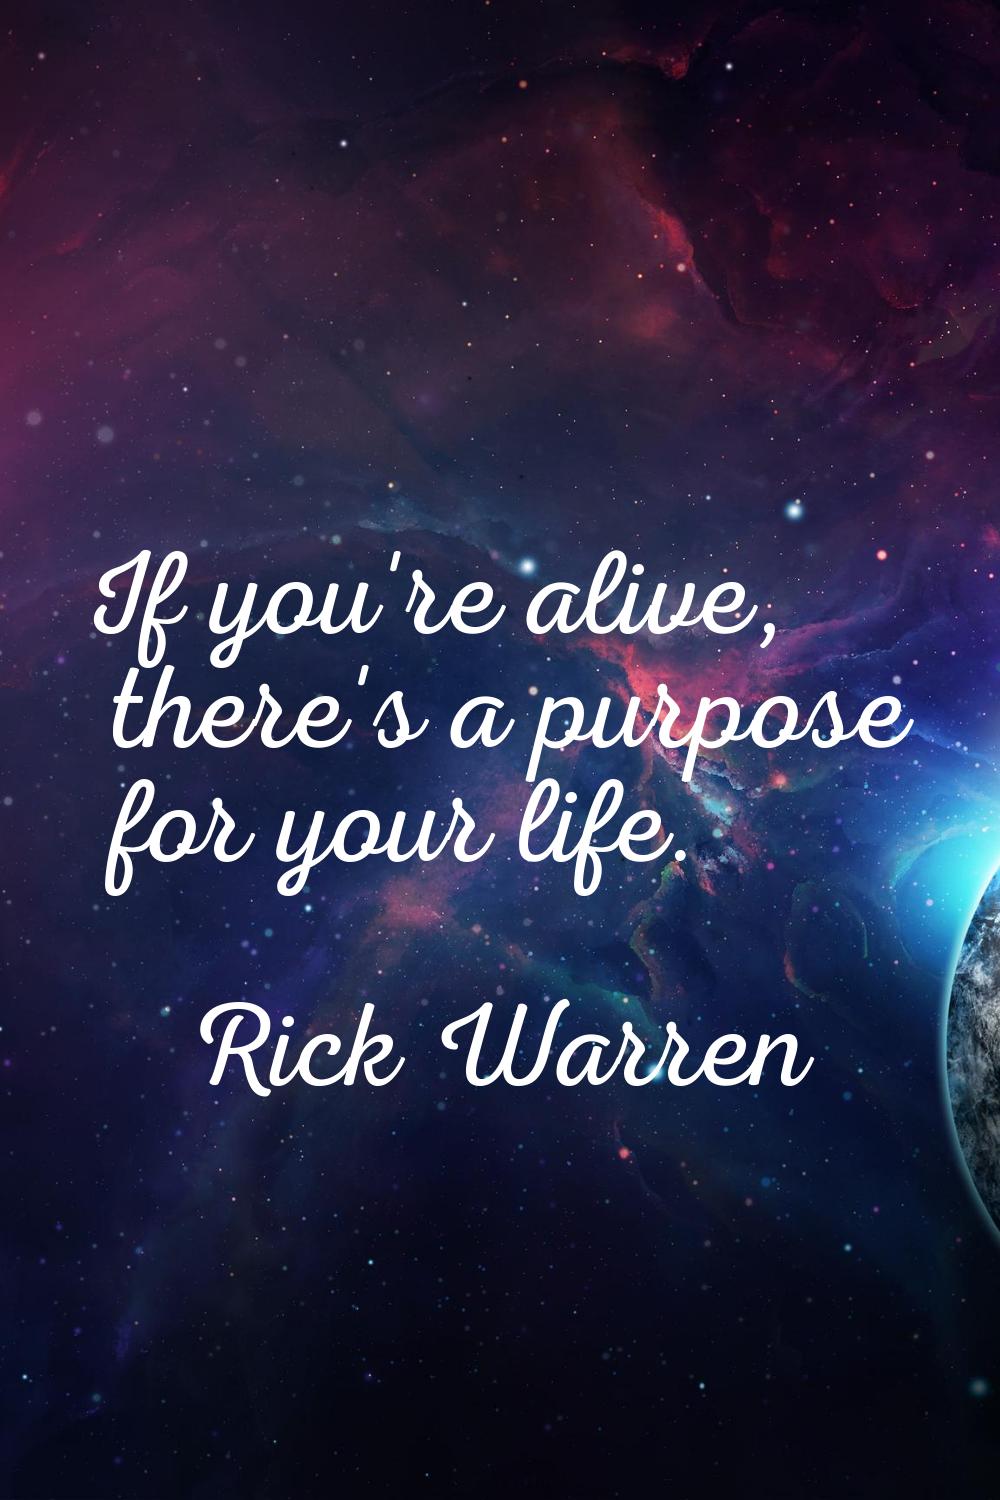 If you're alive, there's a purpose for your life.